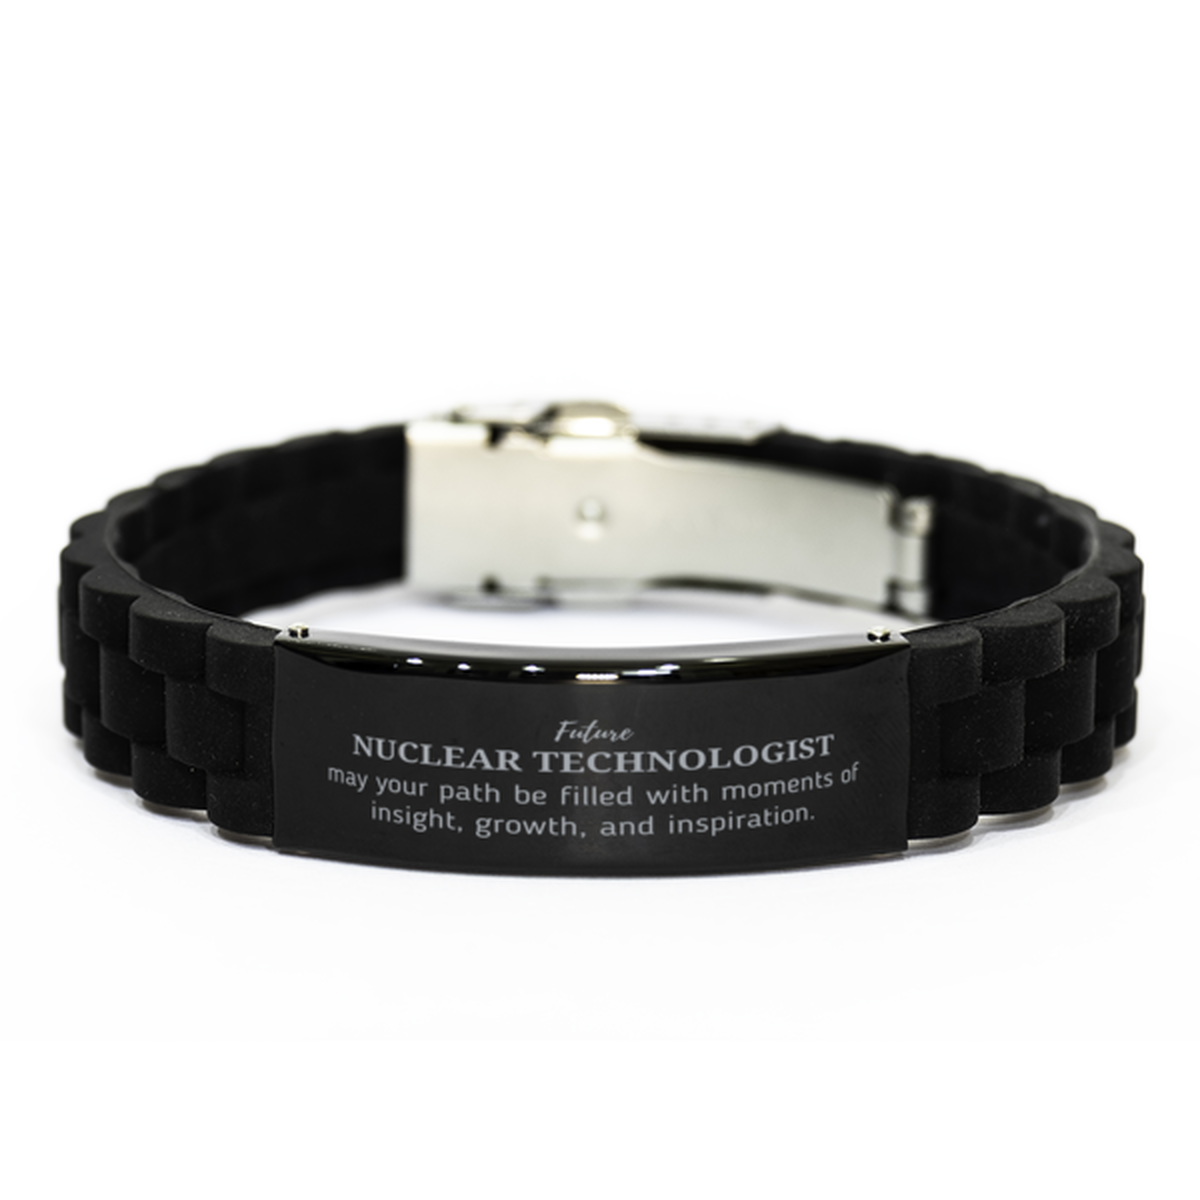 Future Nuclear Technologist Gifts, May your path be filled with moments of insight, Graduation Gifts for New Nuclear Technologist, Christmas Unique Black Glidelock Clasp Bracelet For Men, Women, Friends